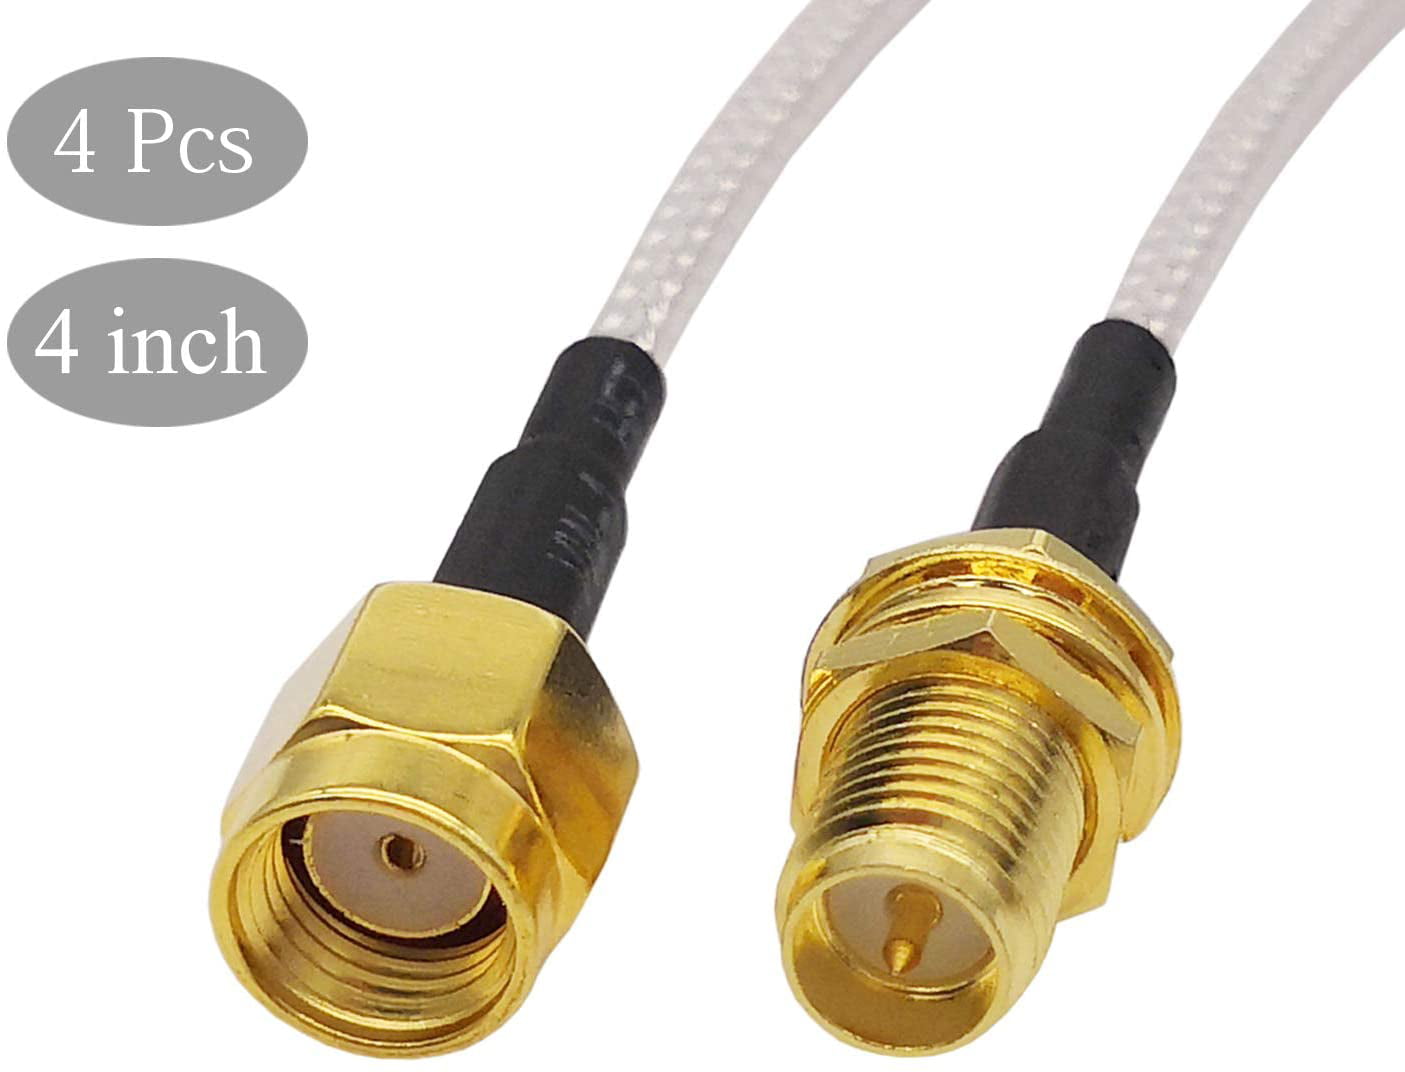 RP-SMA Extension Cable Pigtail RP SMA Male to Female WiFi Antenna Cable RF RG316 Coaxial Coax Jumper FPV RPSMA Antenna Wire 2 Pcs 4 inch